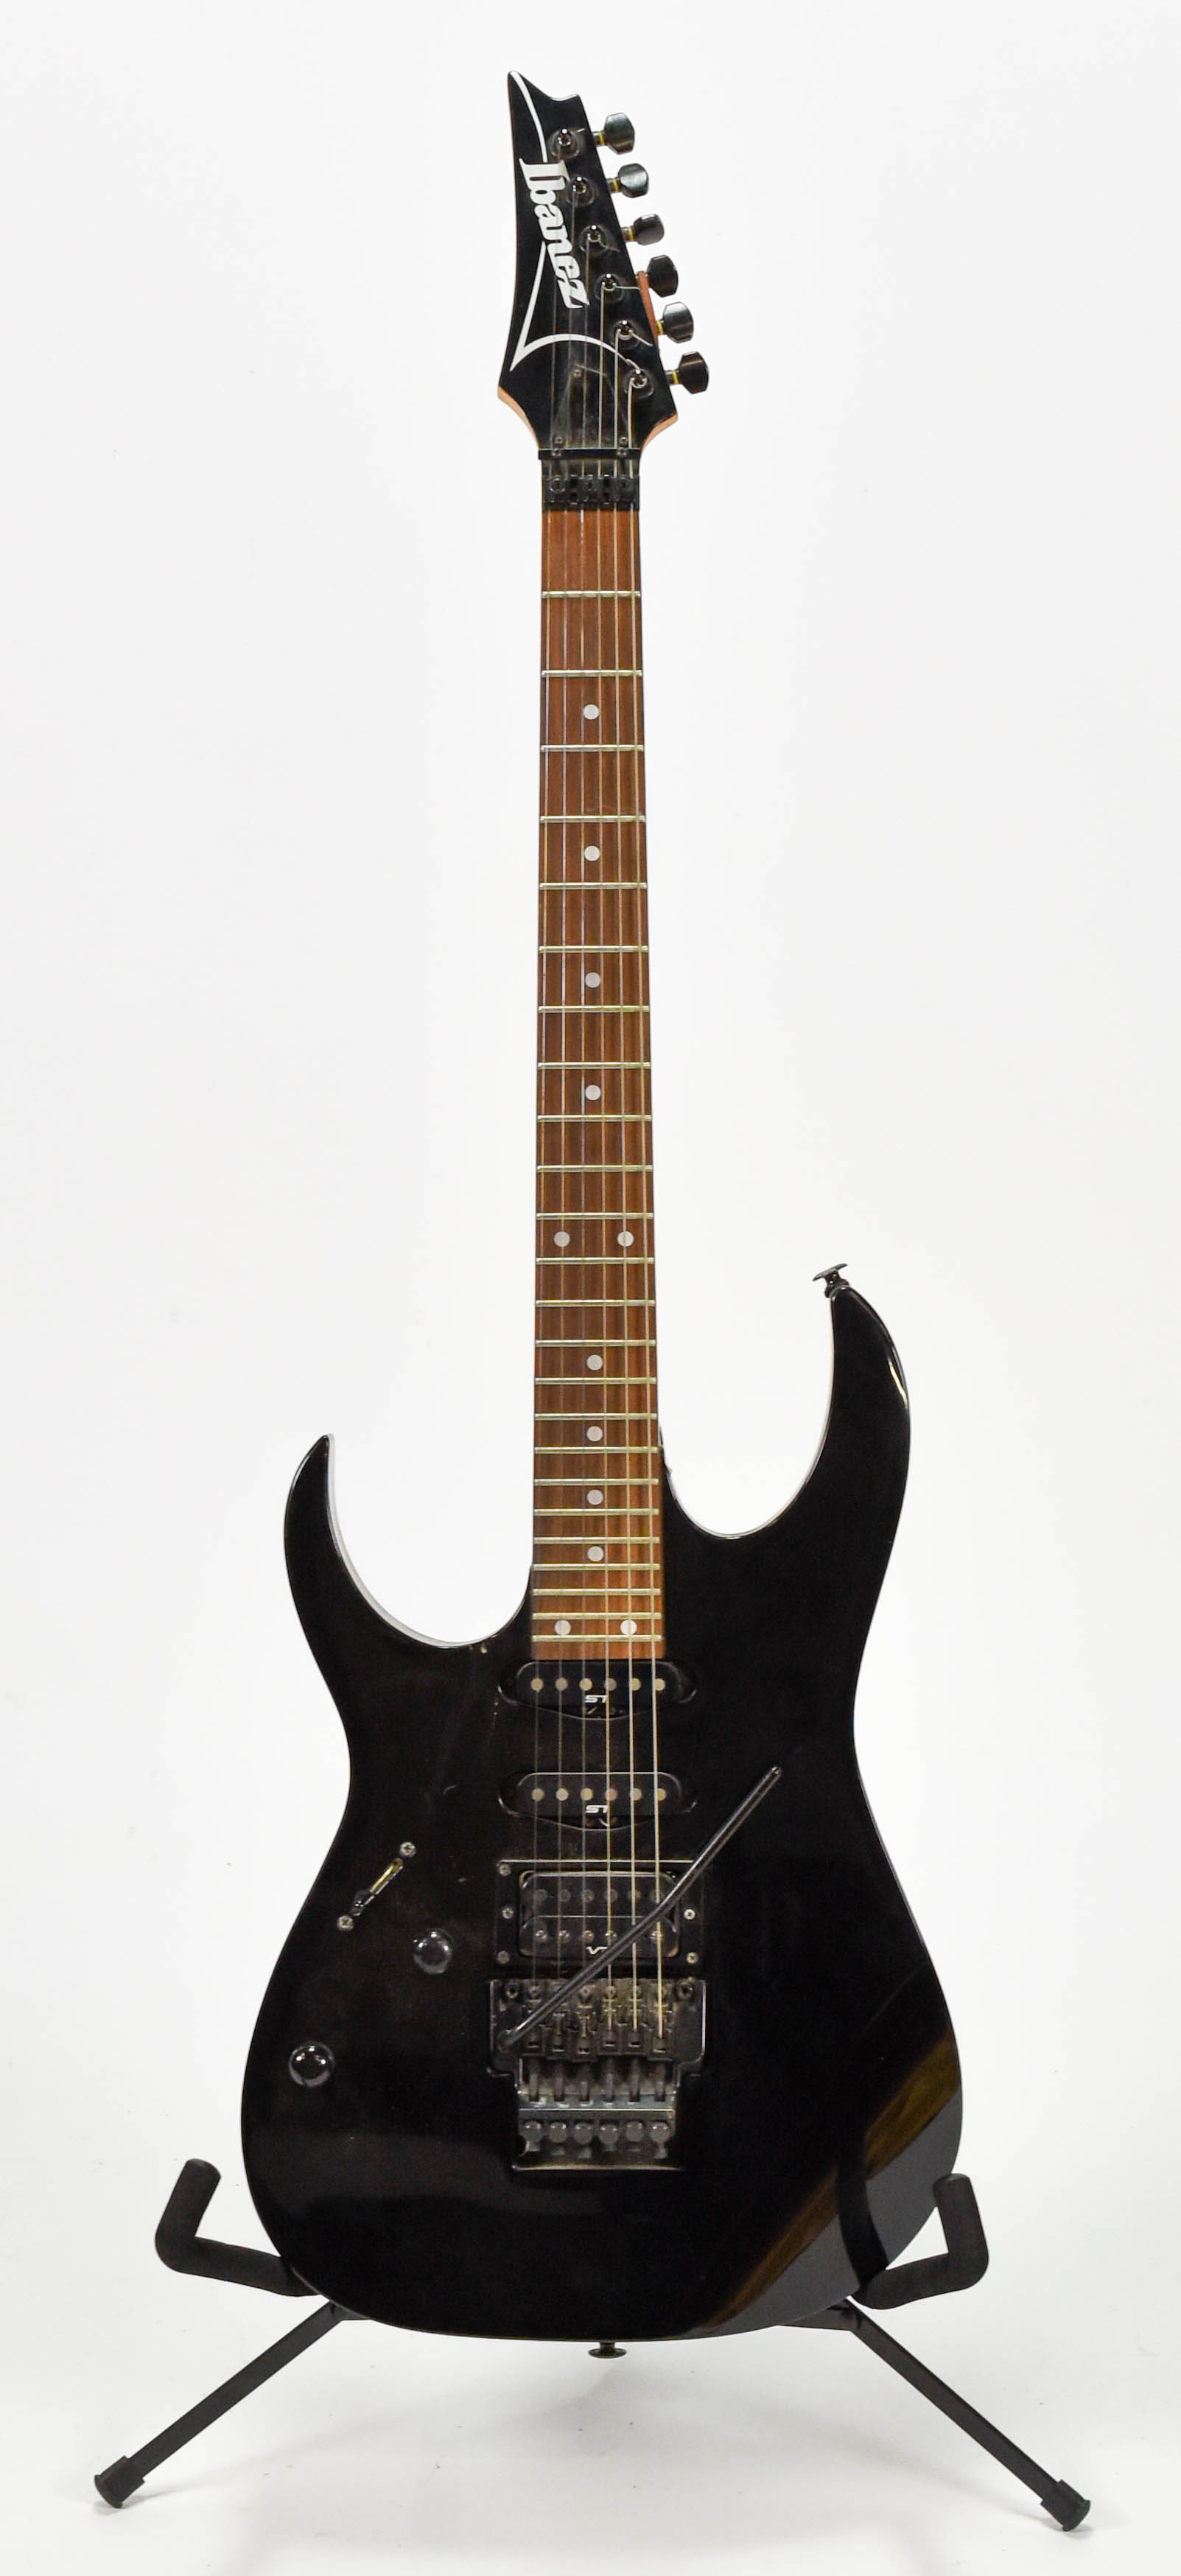 Black Solid Body Ibanez Electric Guitar Japanese